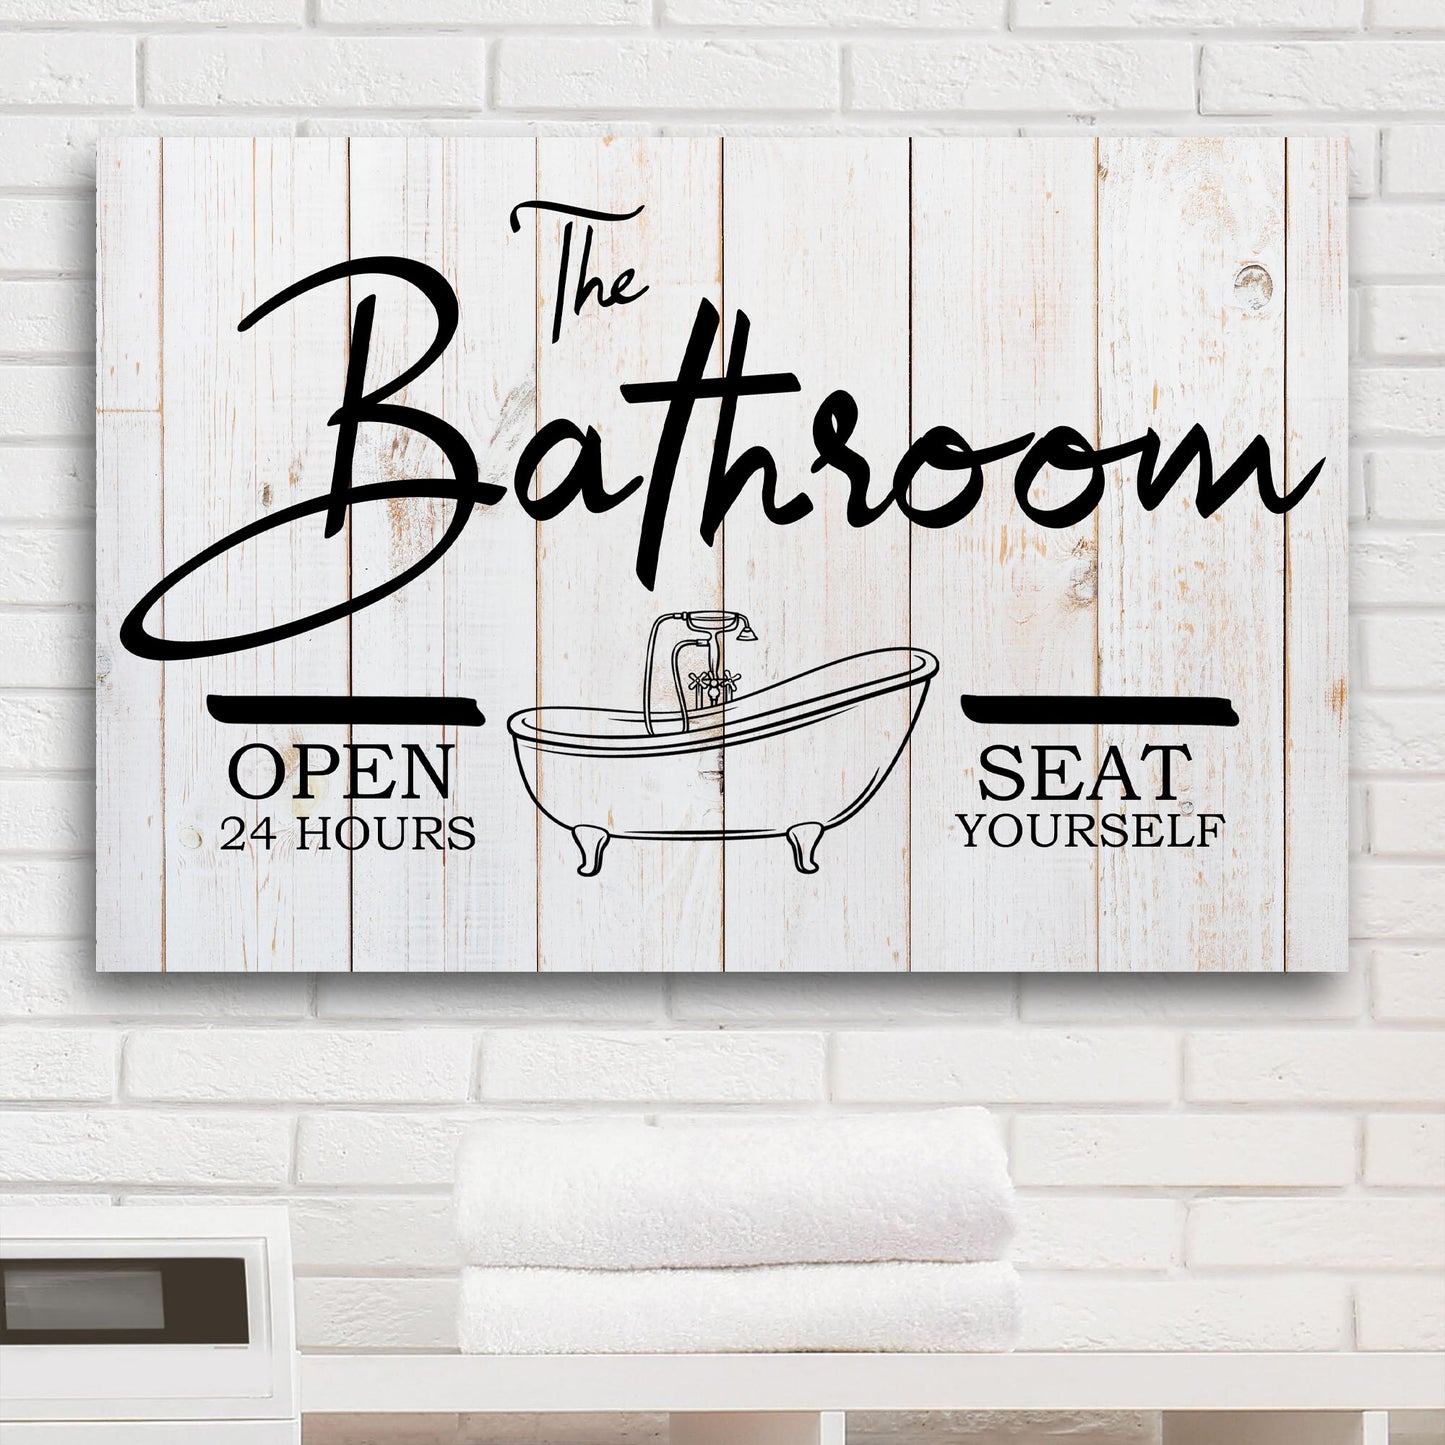 The Bathroom Sign - Image by Tailored Canvases